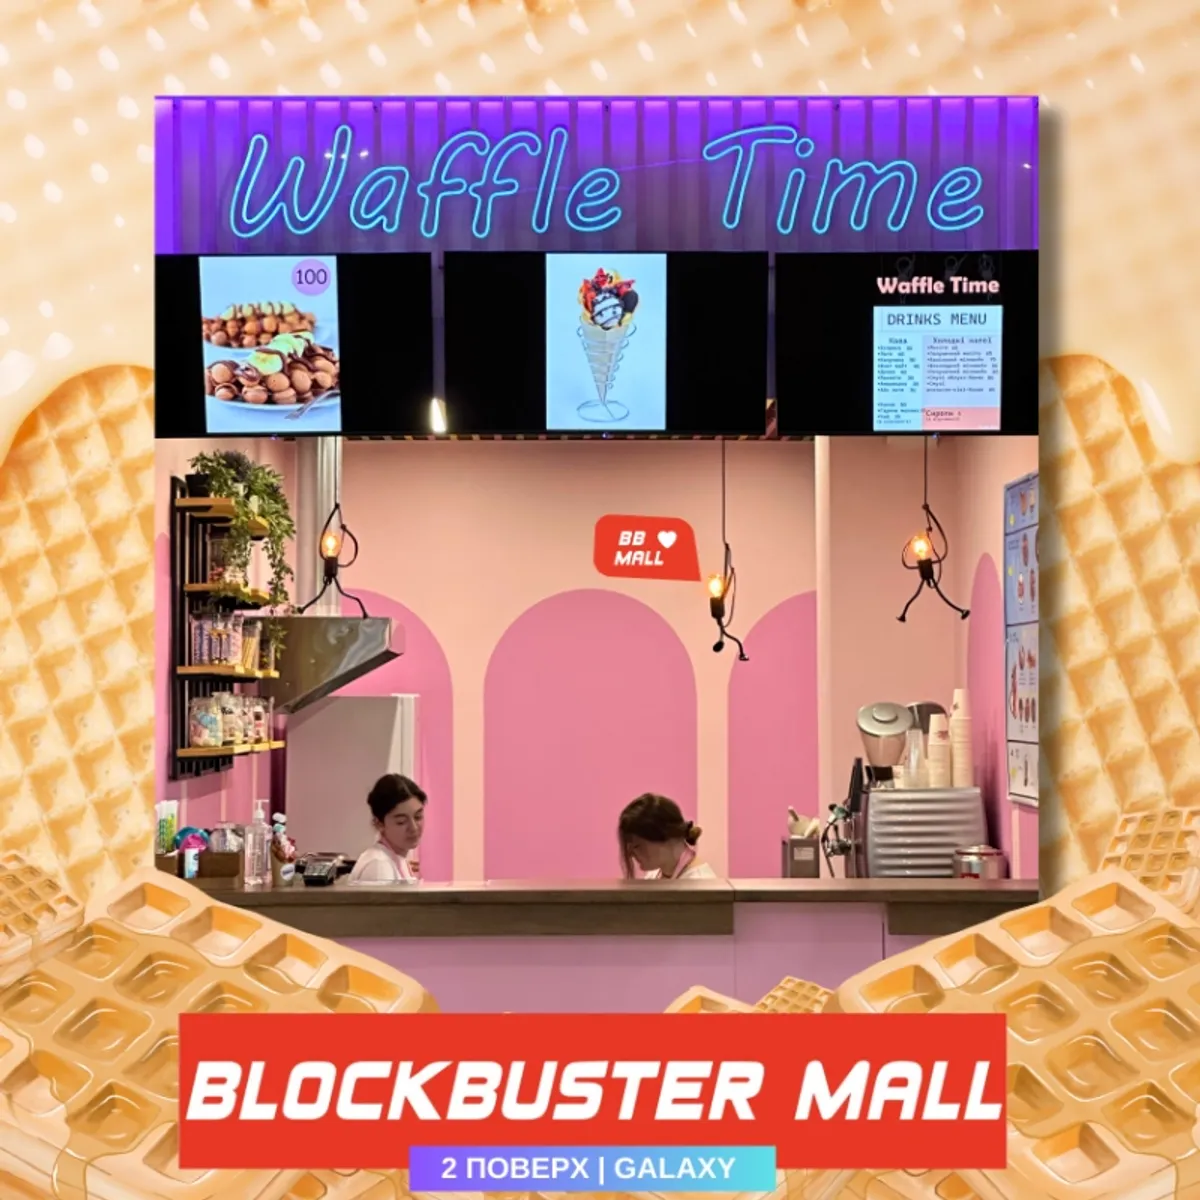 Ready for a sweet adventure? Waffle Time opens at BLOCKBUSTER MALL